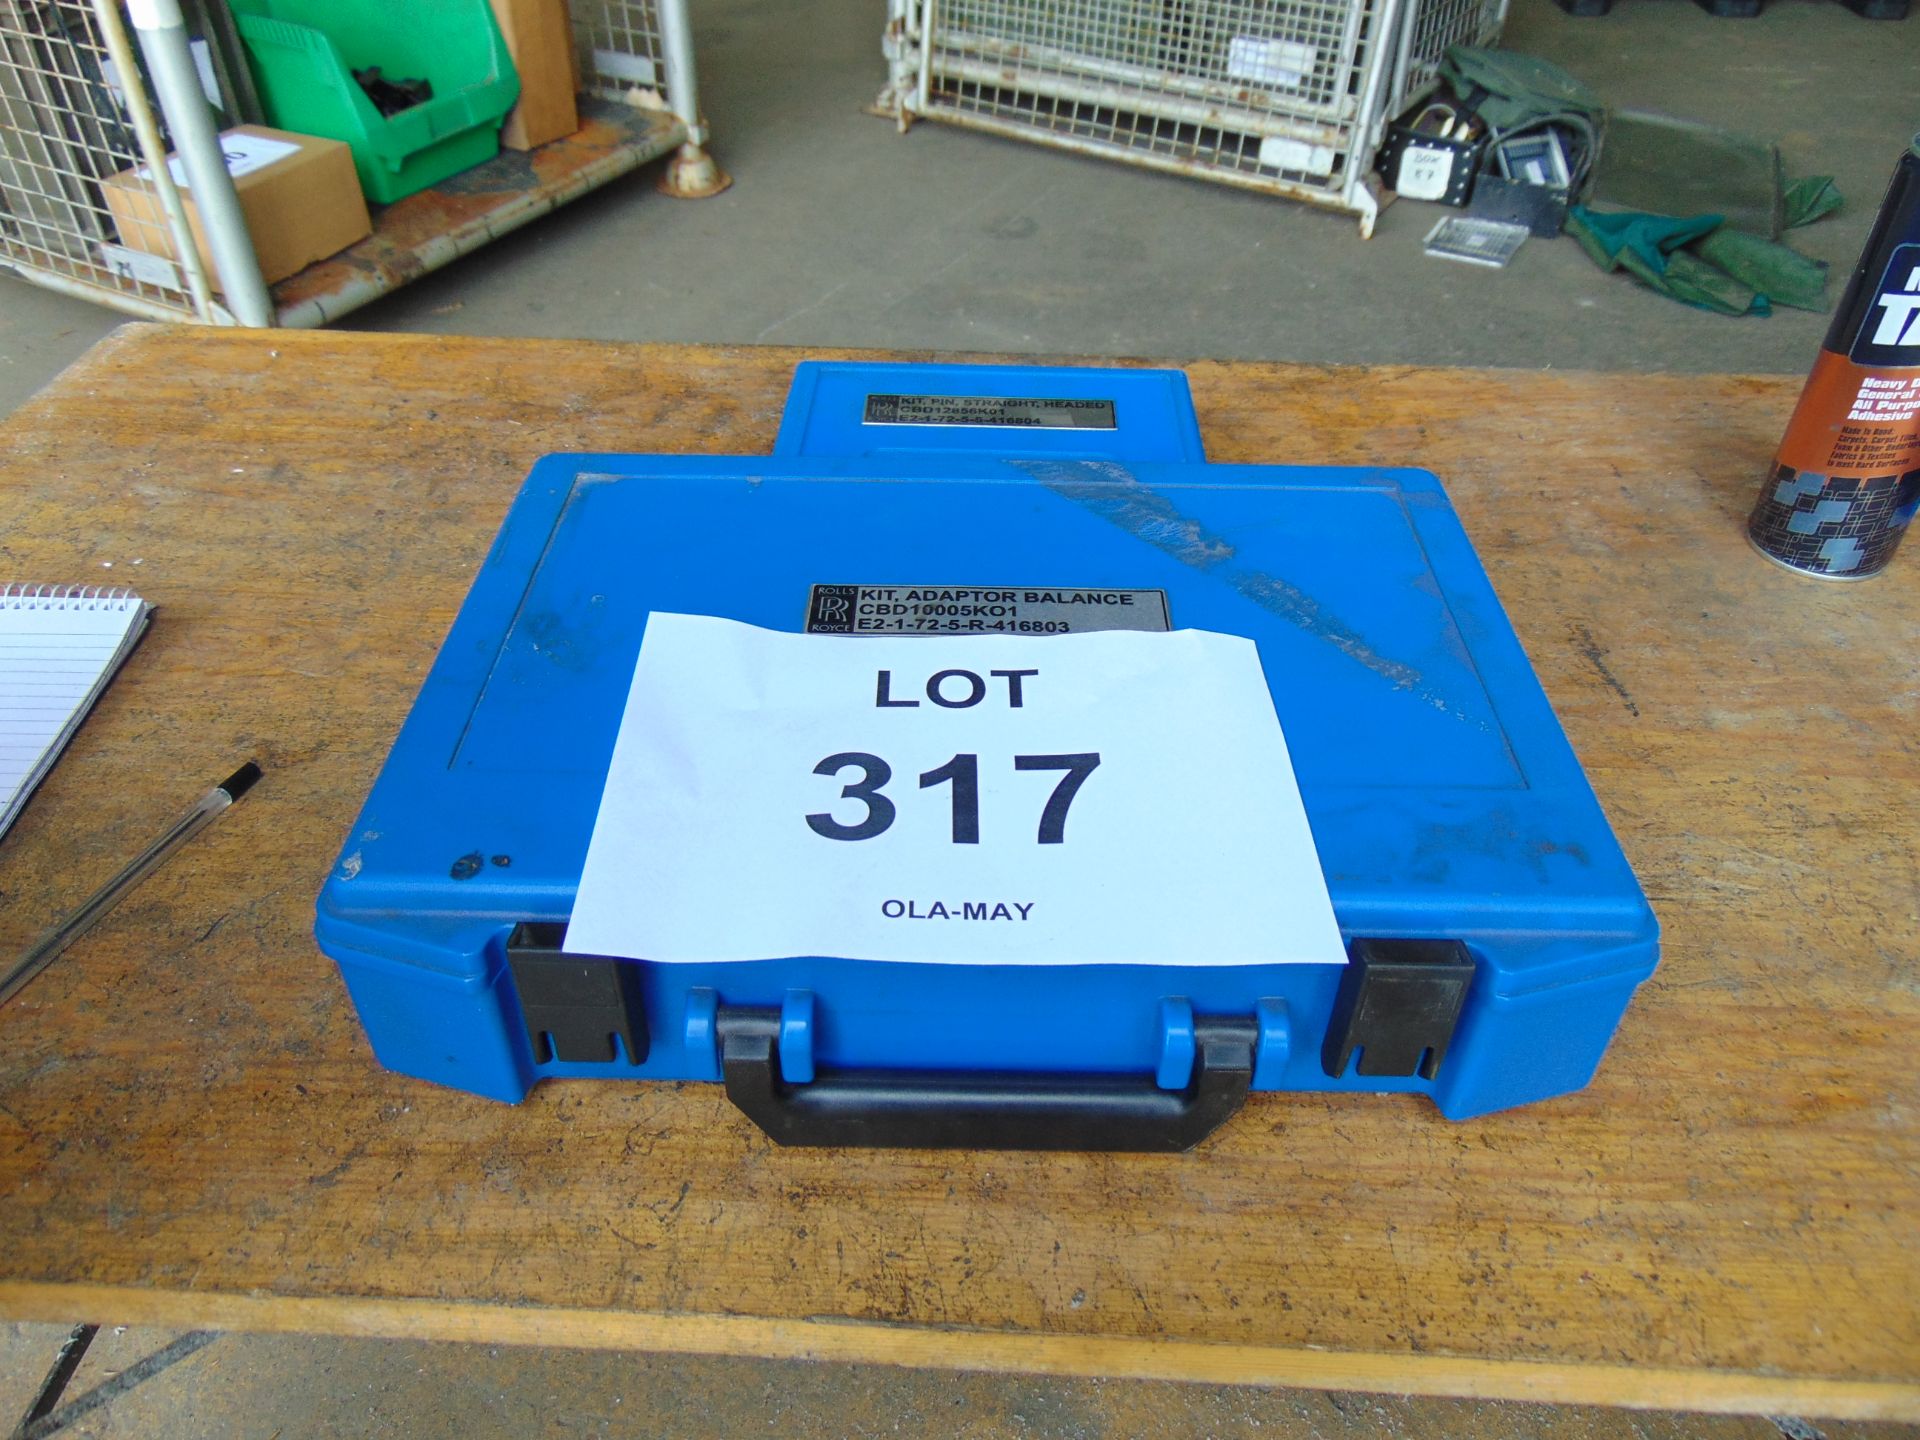 New Unissued Rolls Royce Balancing Kit from RAF, Reserve Stocks in Original Case - Image 6 of 10